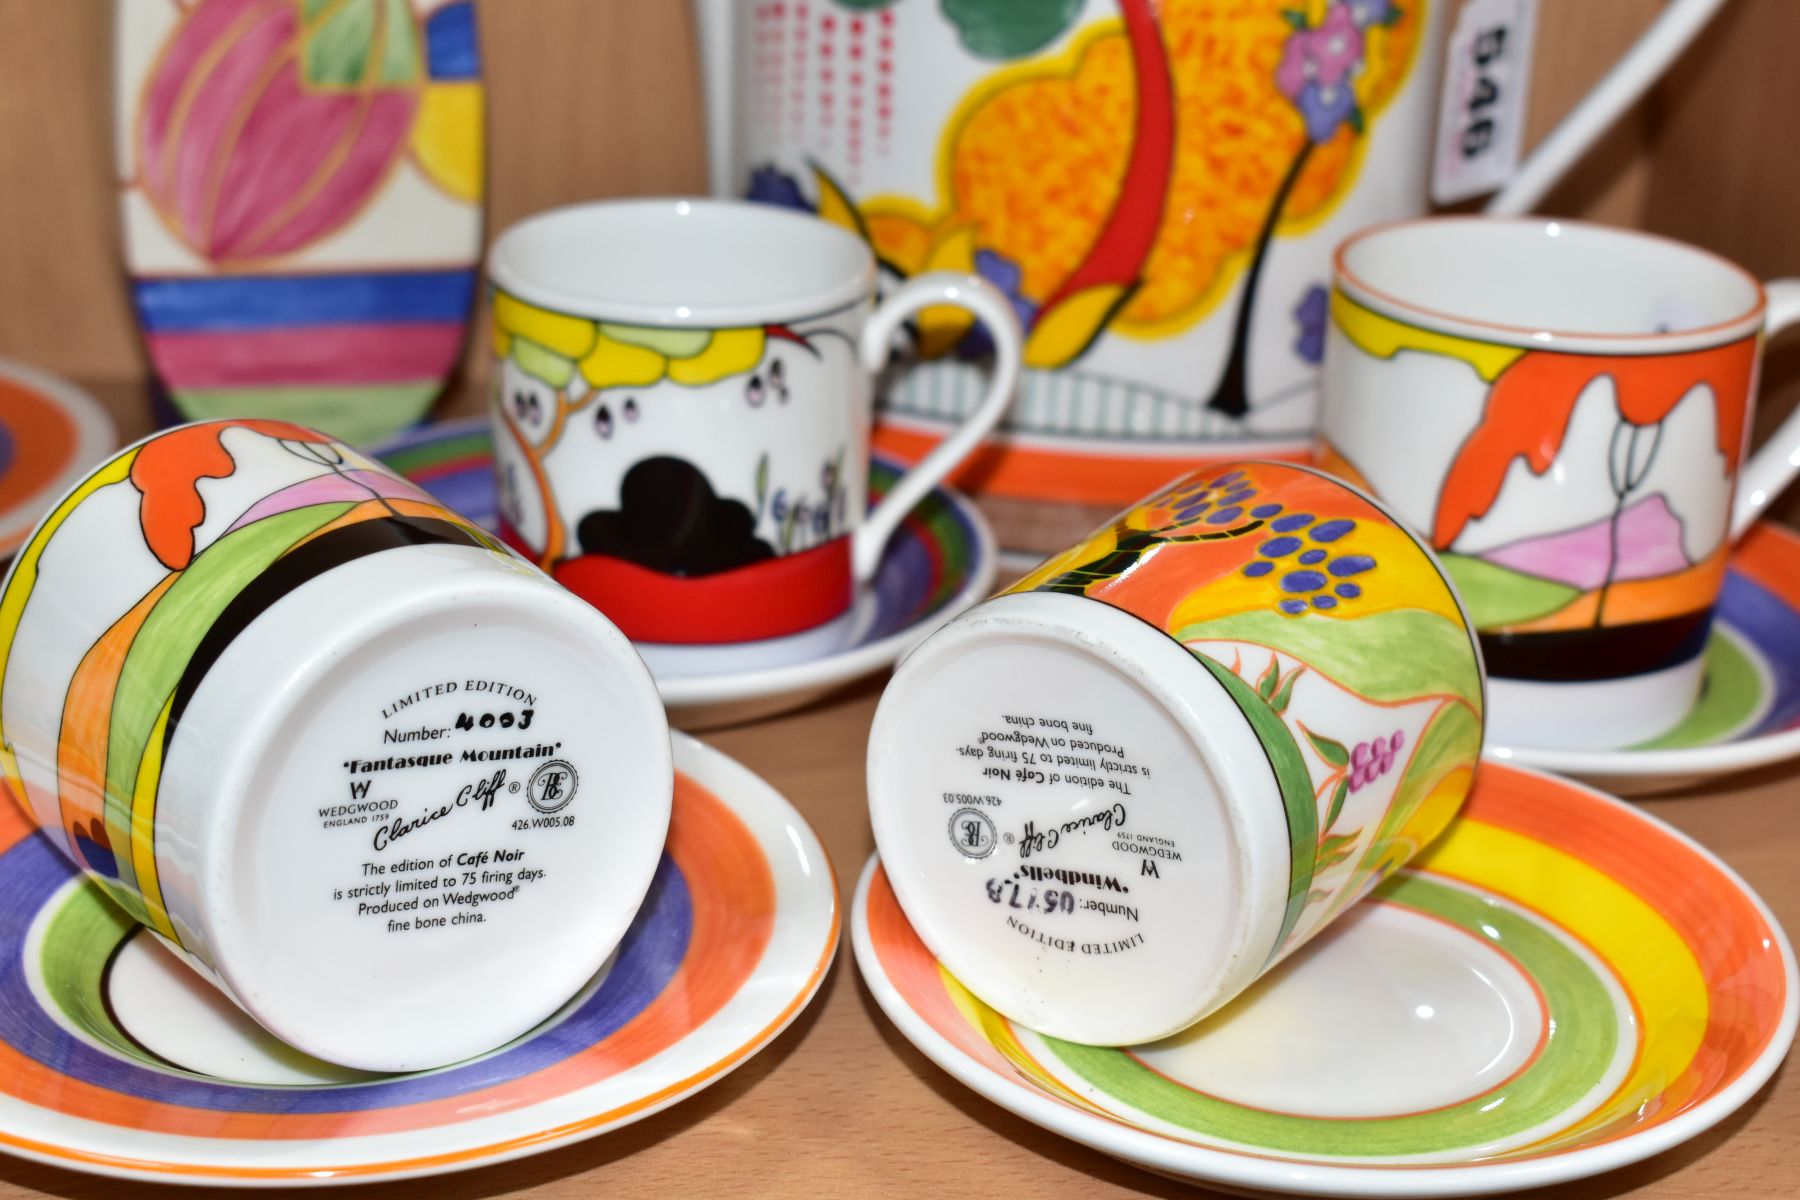 A WEDGWOOD CLARICE CLIFF COFFEE POT, SUGAR SIFTER AND SIX COFFEE CANS AND SAUCERS, comprising a - Image 6 of 7